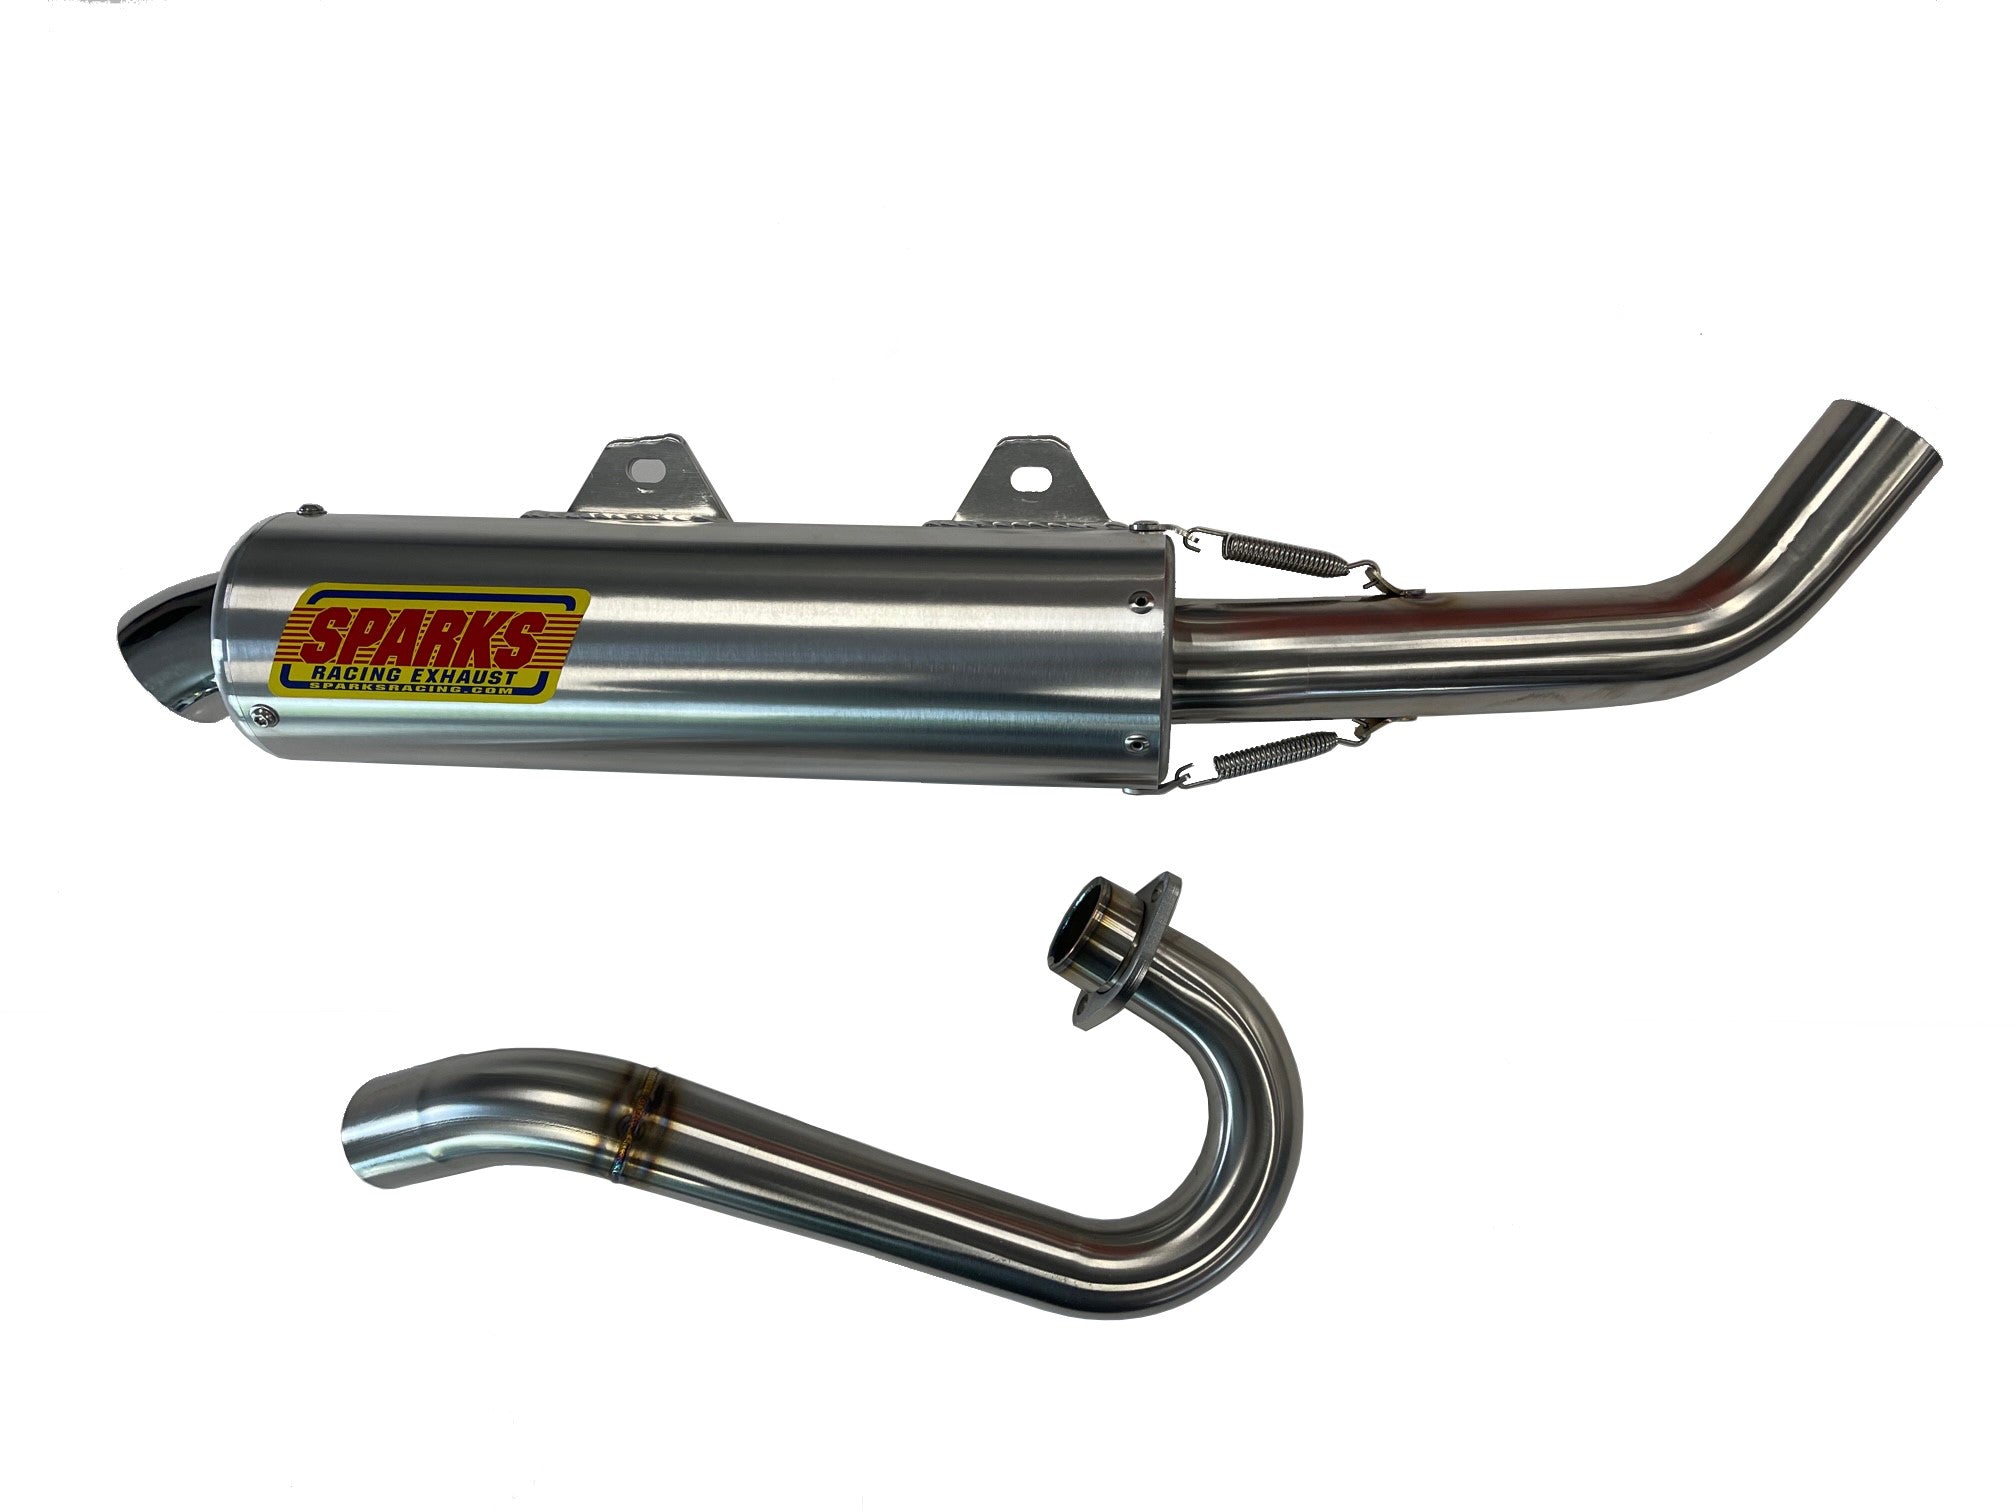 Sparks Racing X-6 Stainless Steel Exhaust System for YFZ450R 09-24